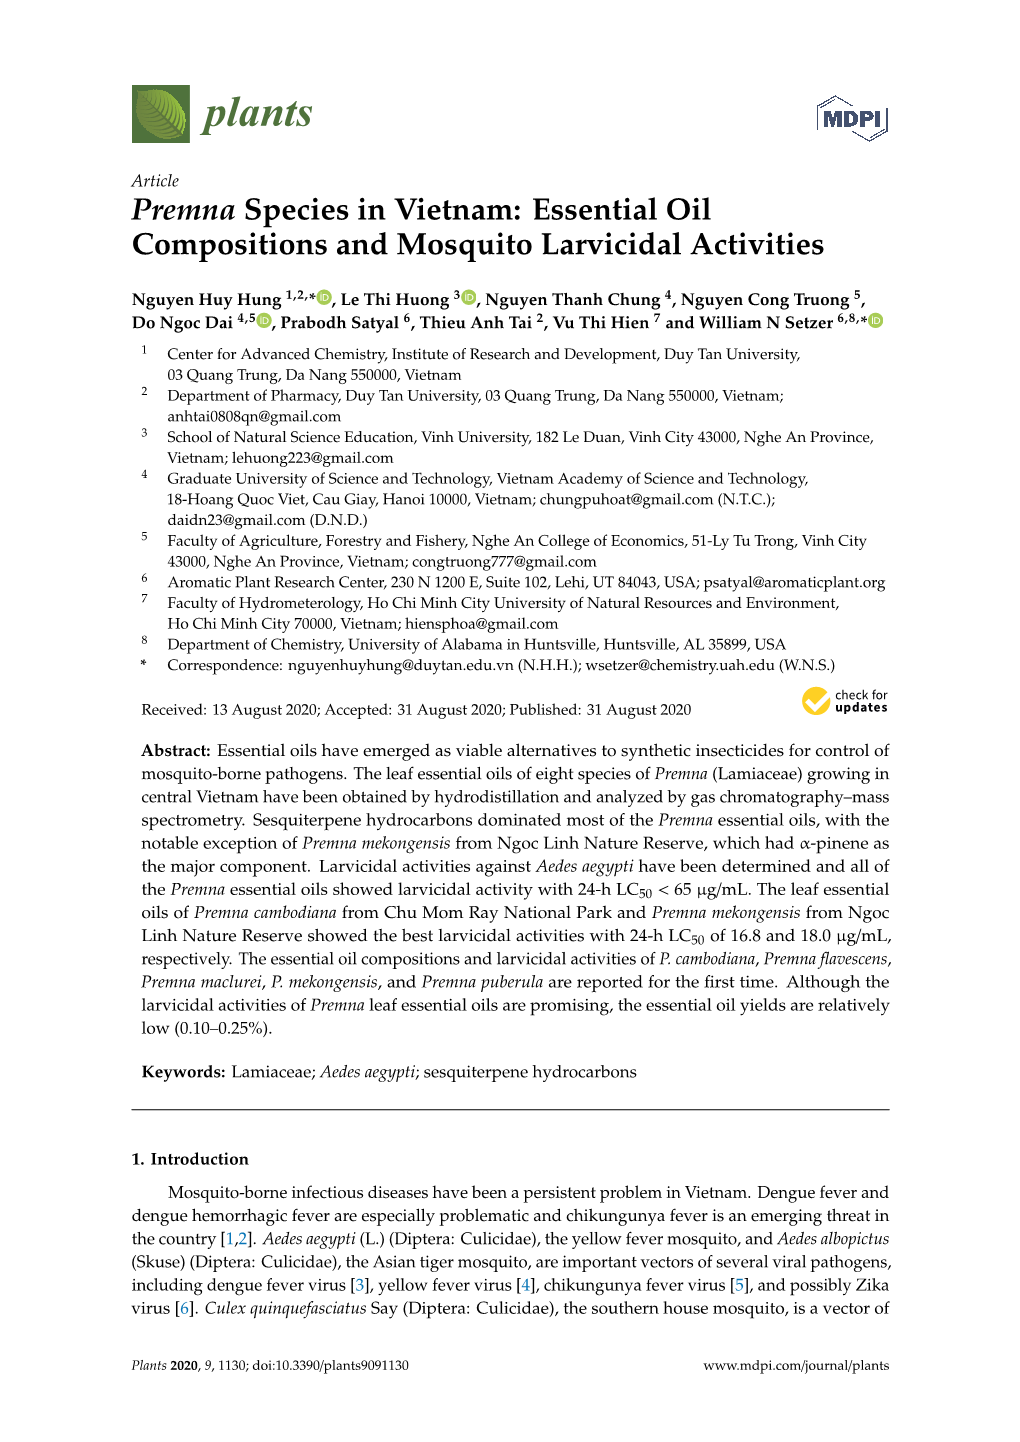 Essential Oil Compositions and Mosquito Larvicidal Activities